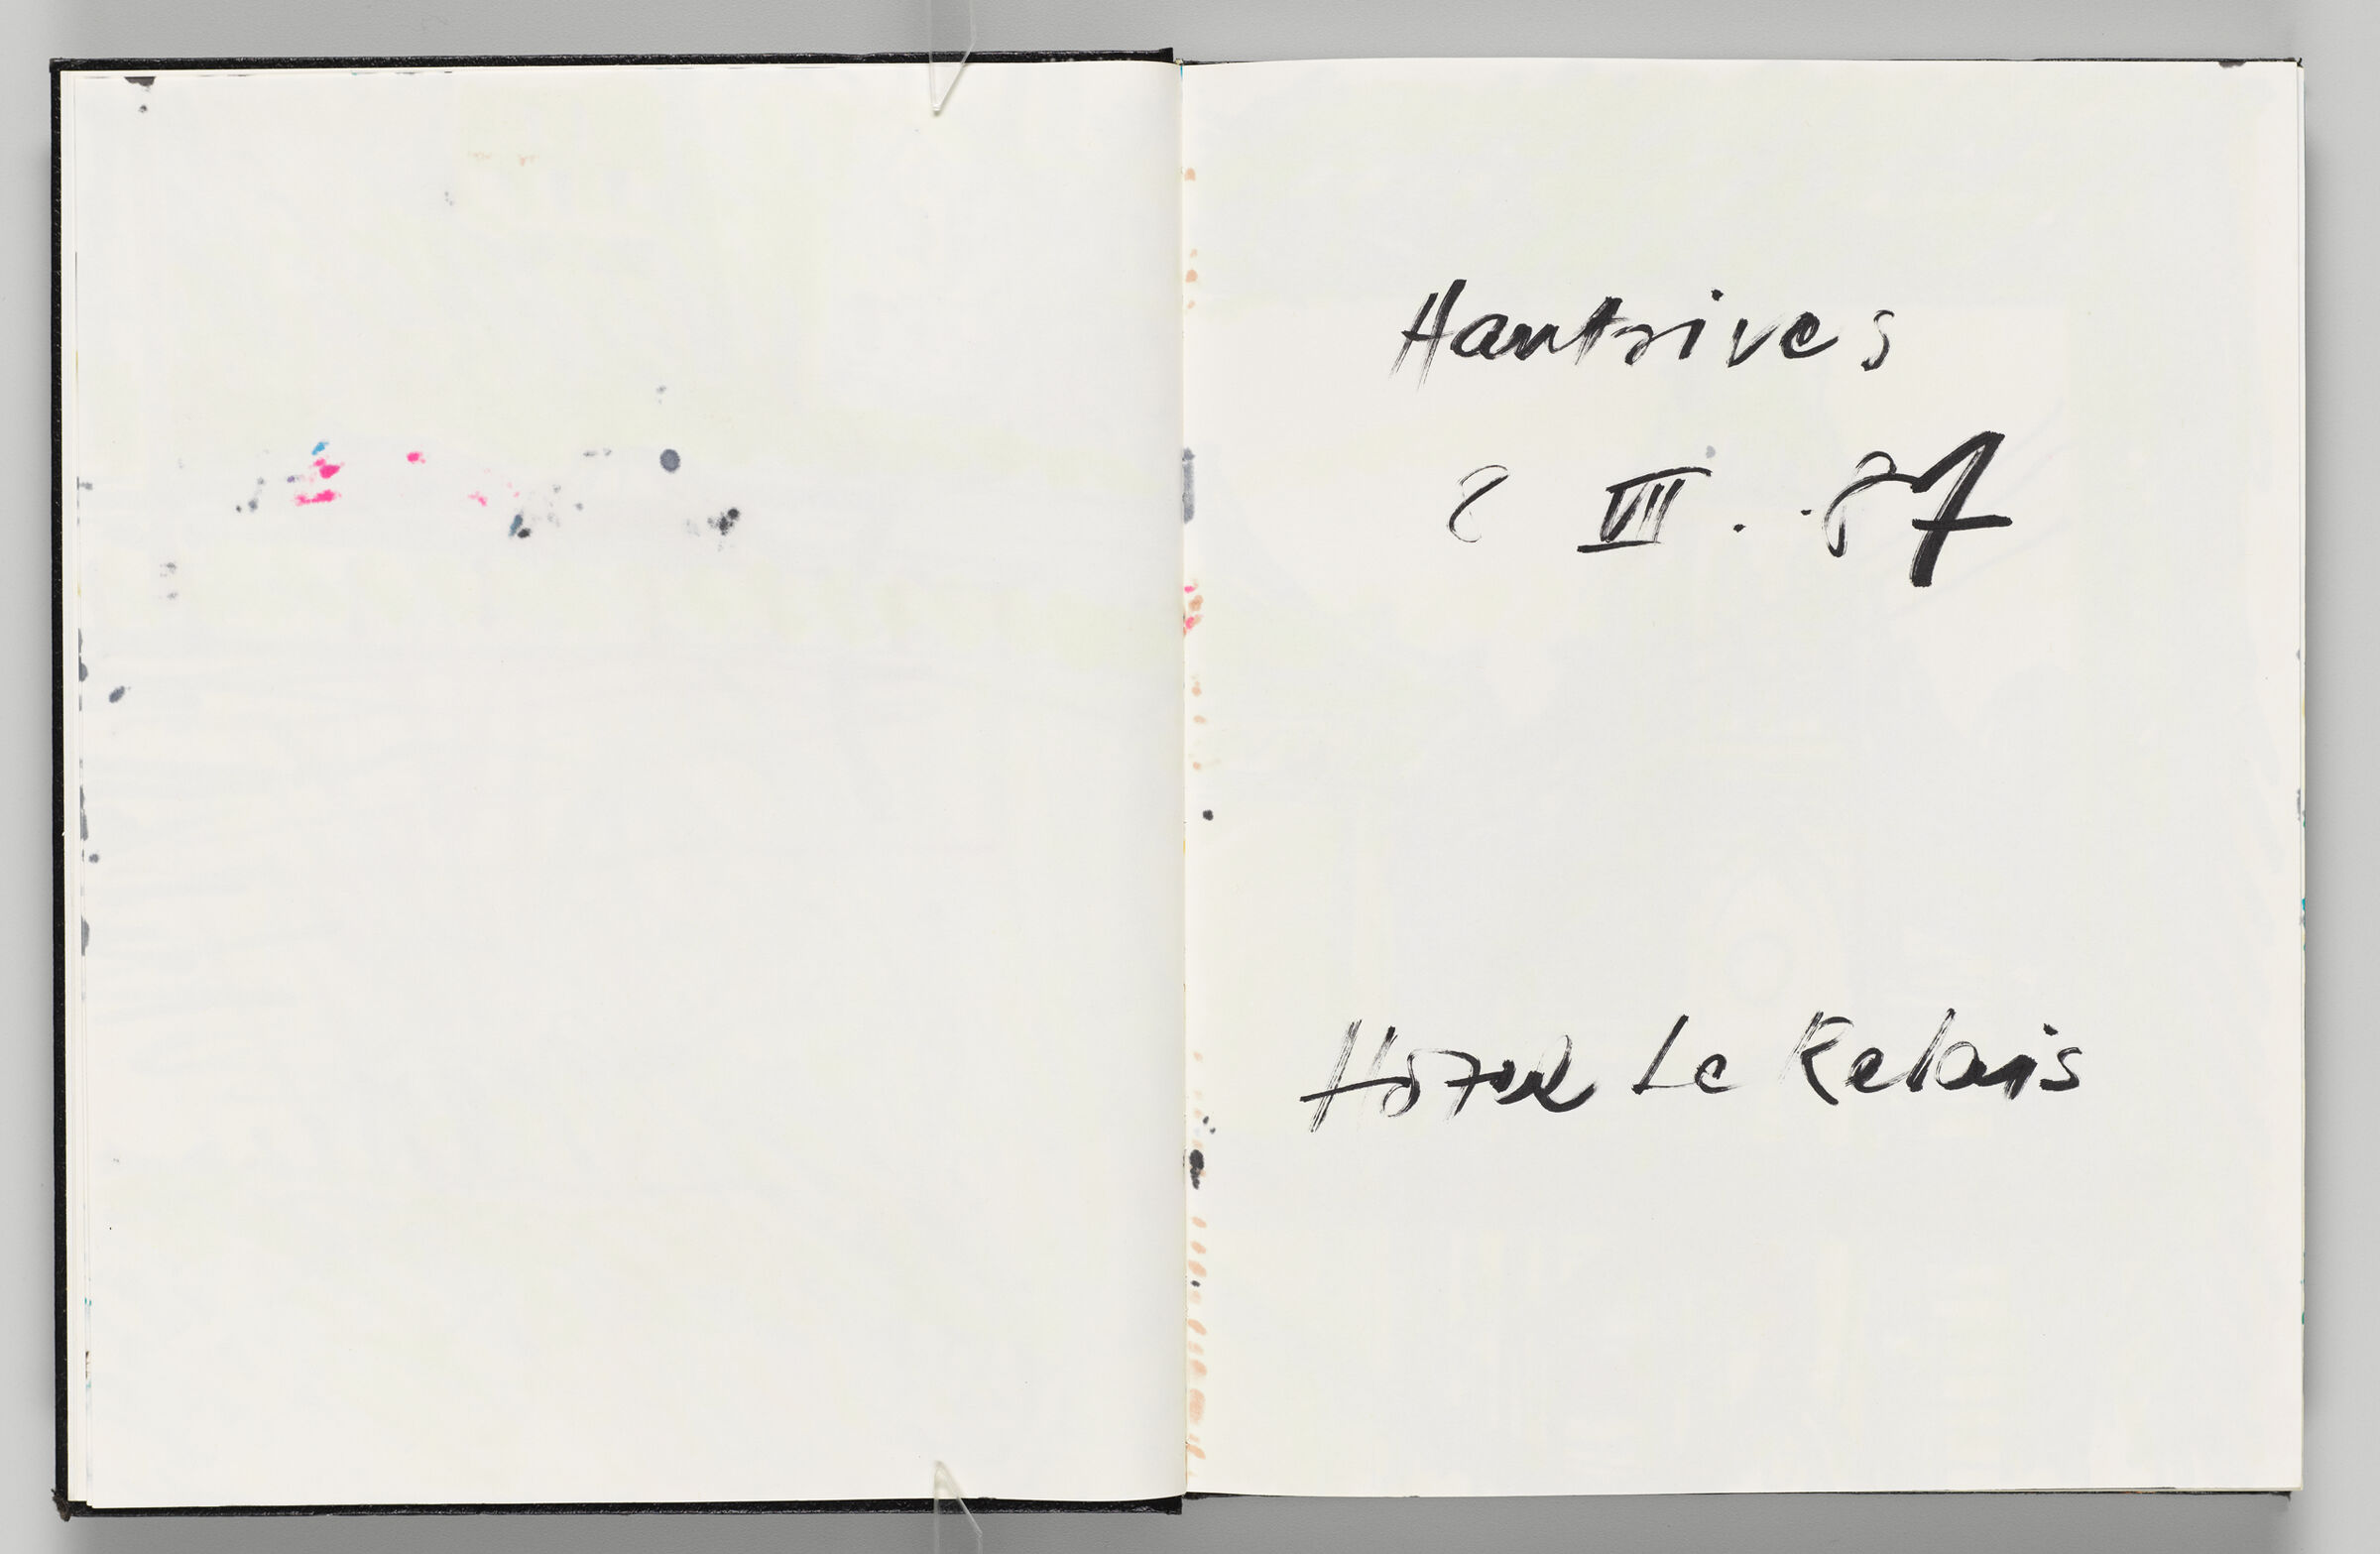 Untitled (Blank With Color Transfer, Left Page); Untitled (Note, Right Page)